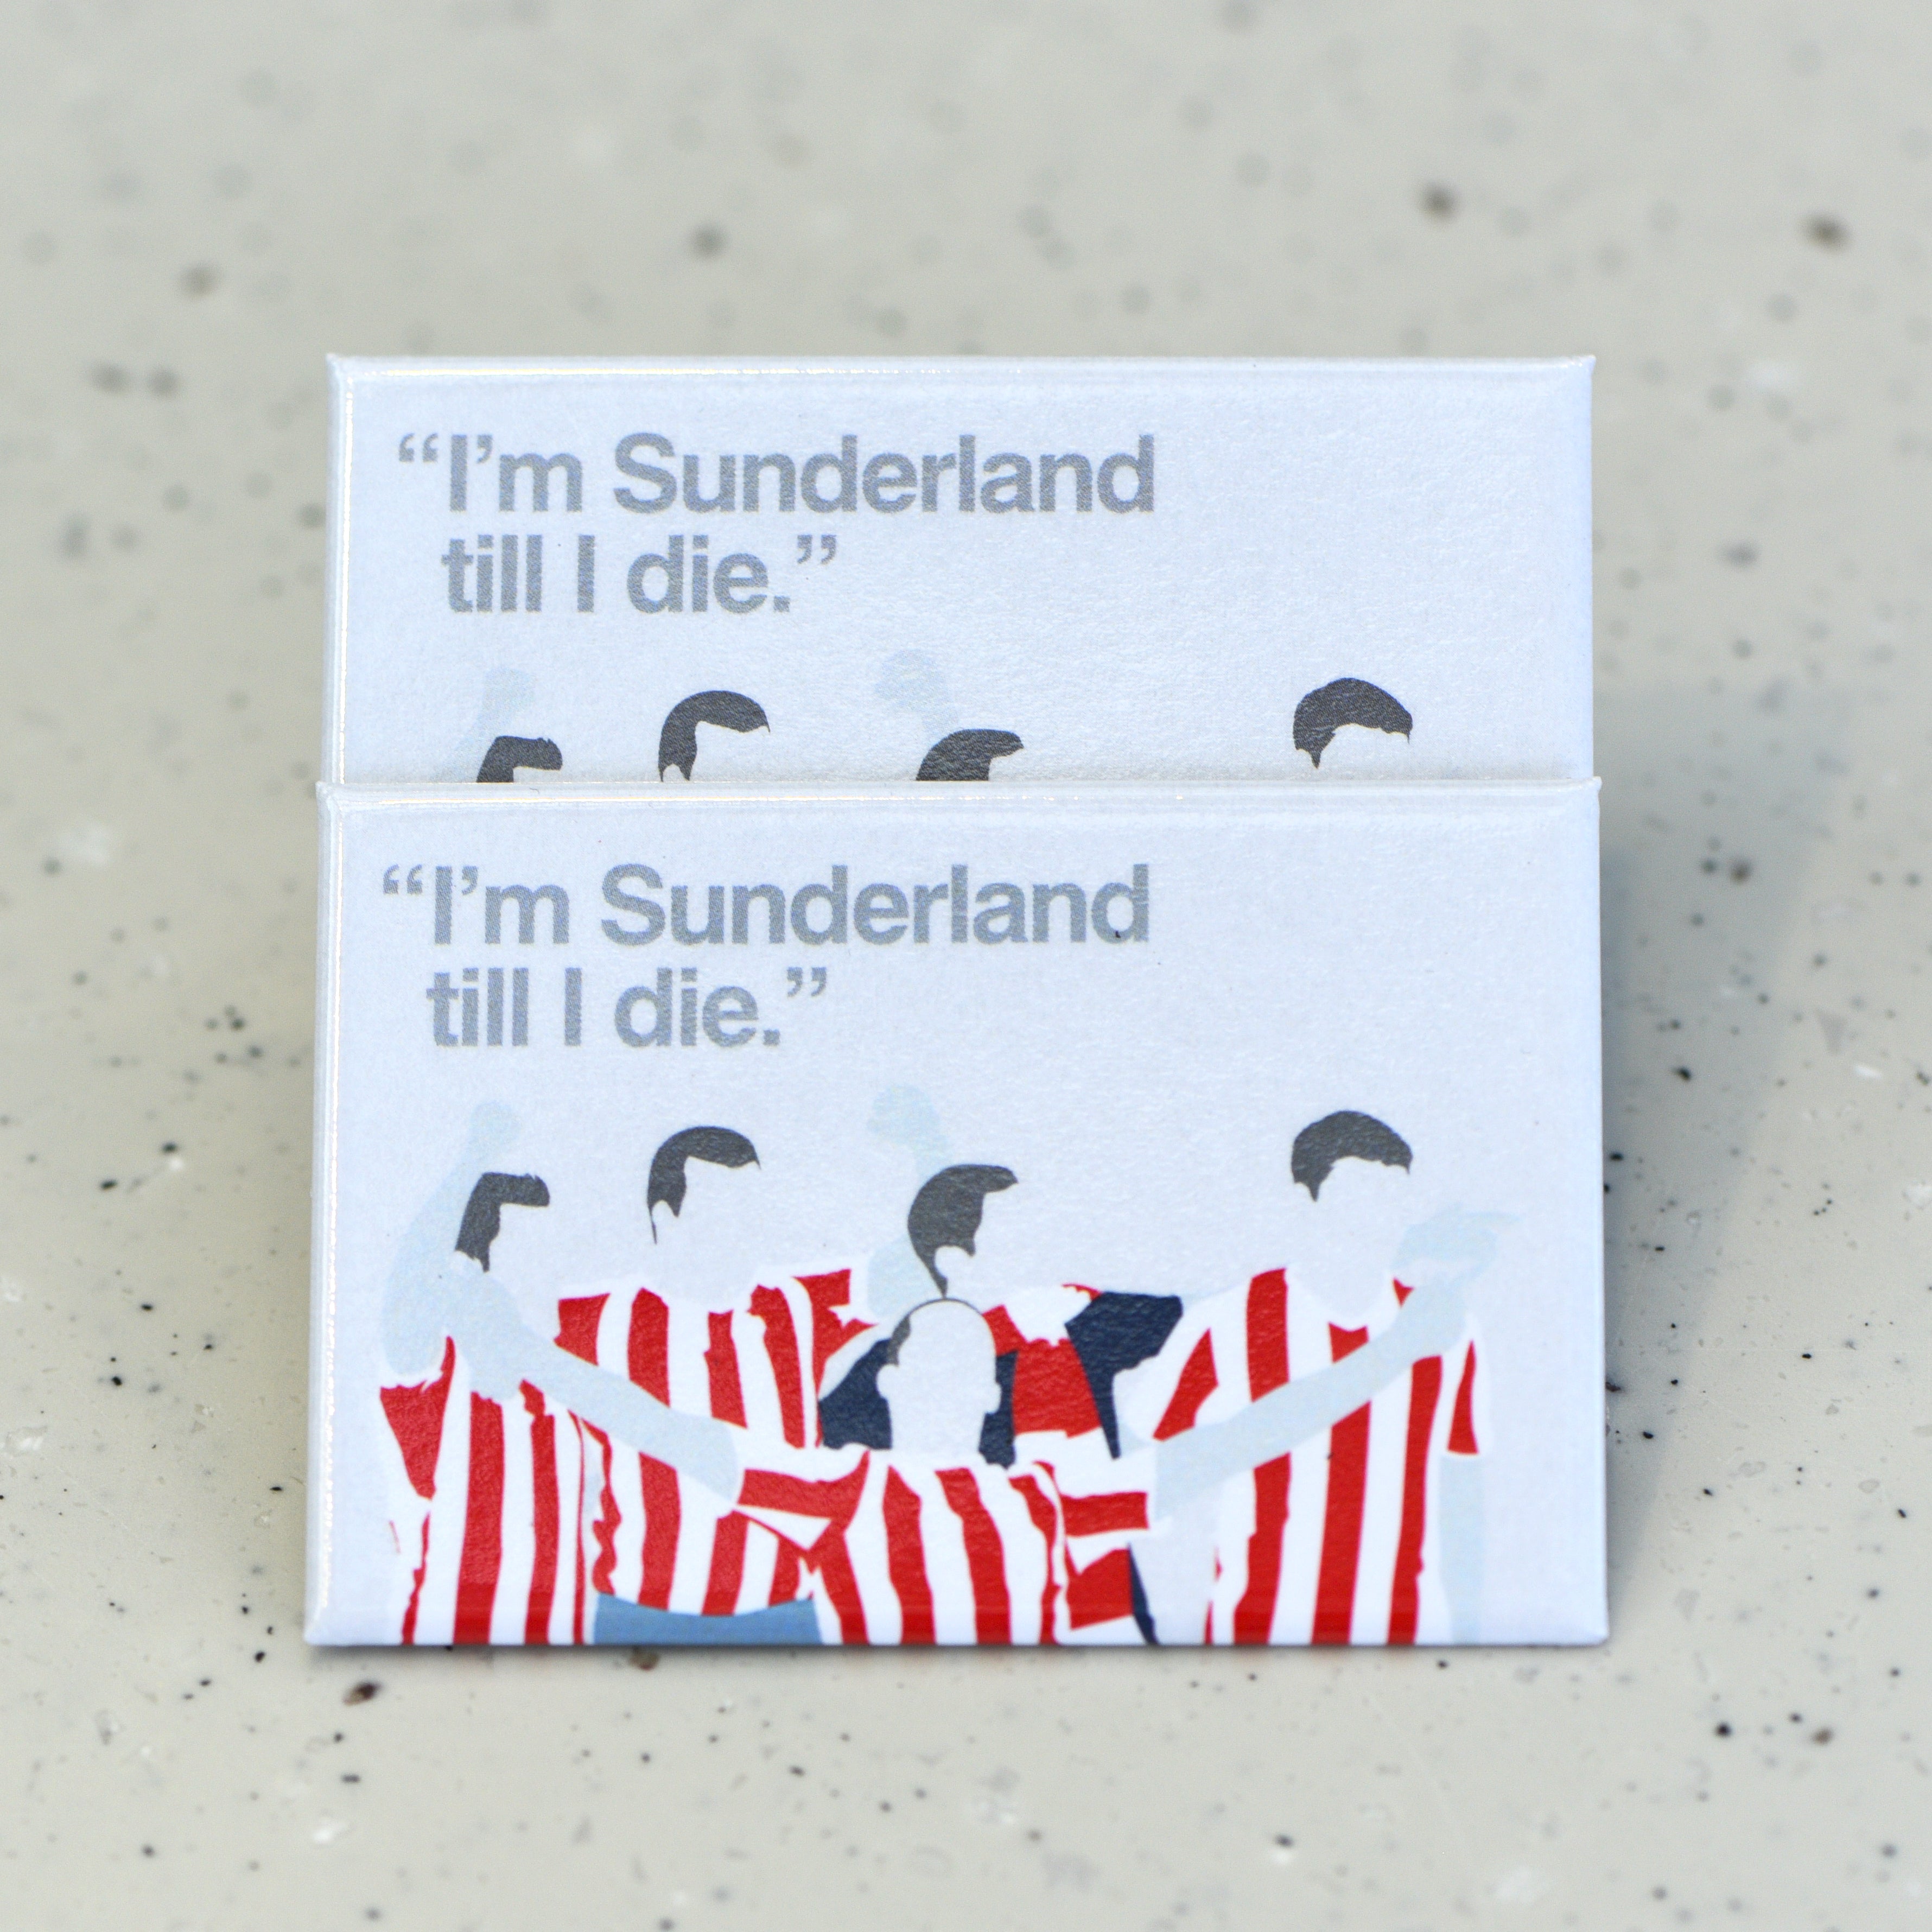 Two flat rectangle magnets sit one on top of the other - they feature a graphic illustration of four faceless figures wearing red and white striped t-shirts with raised arms, a fifth figure in the front has its arms spread wide in celebration. In grey text, to the top left of the magnet, reads "I'm Sunderland till I die."